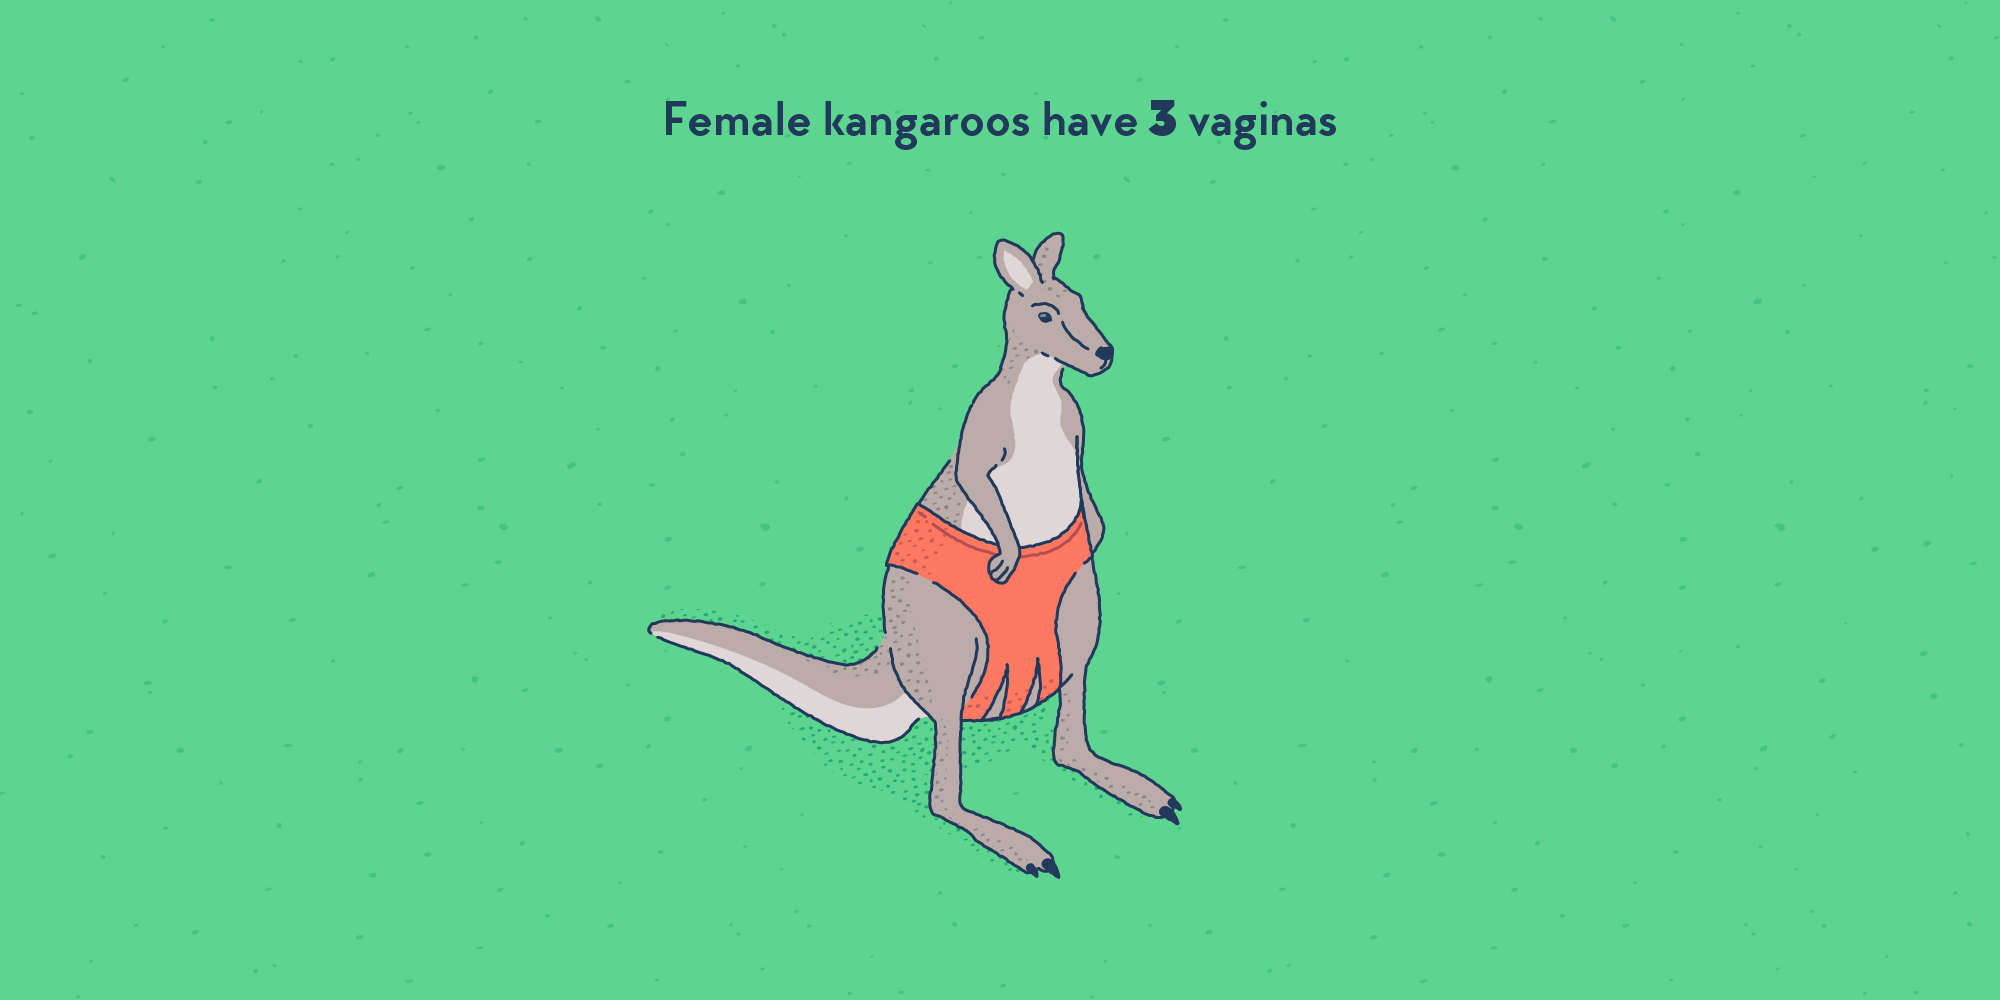 A kangaroo wearing underwear that has three straps between the legs instead of one.